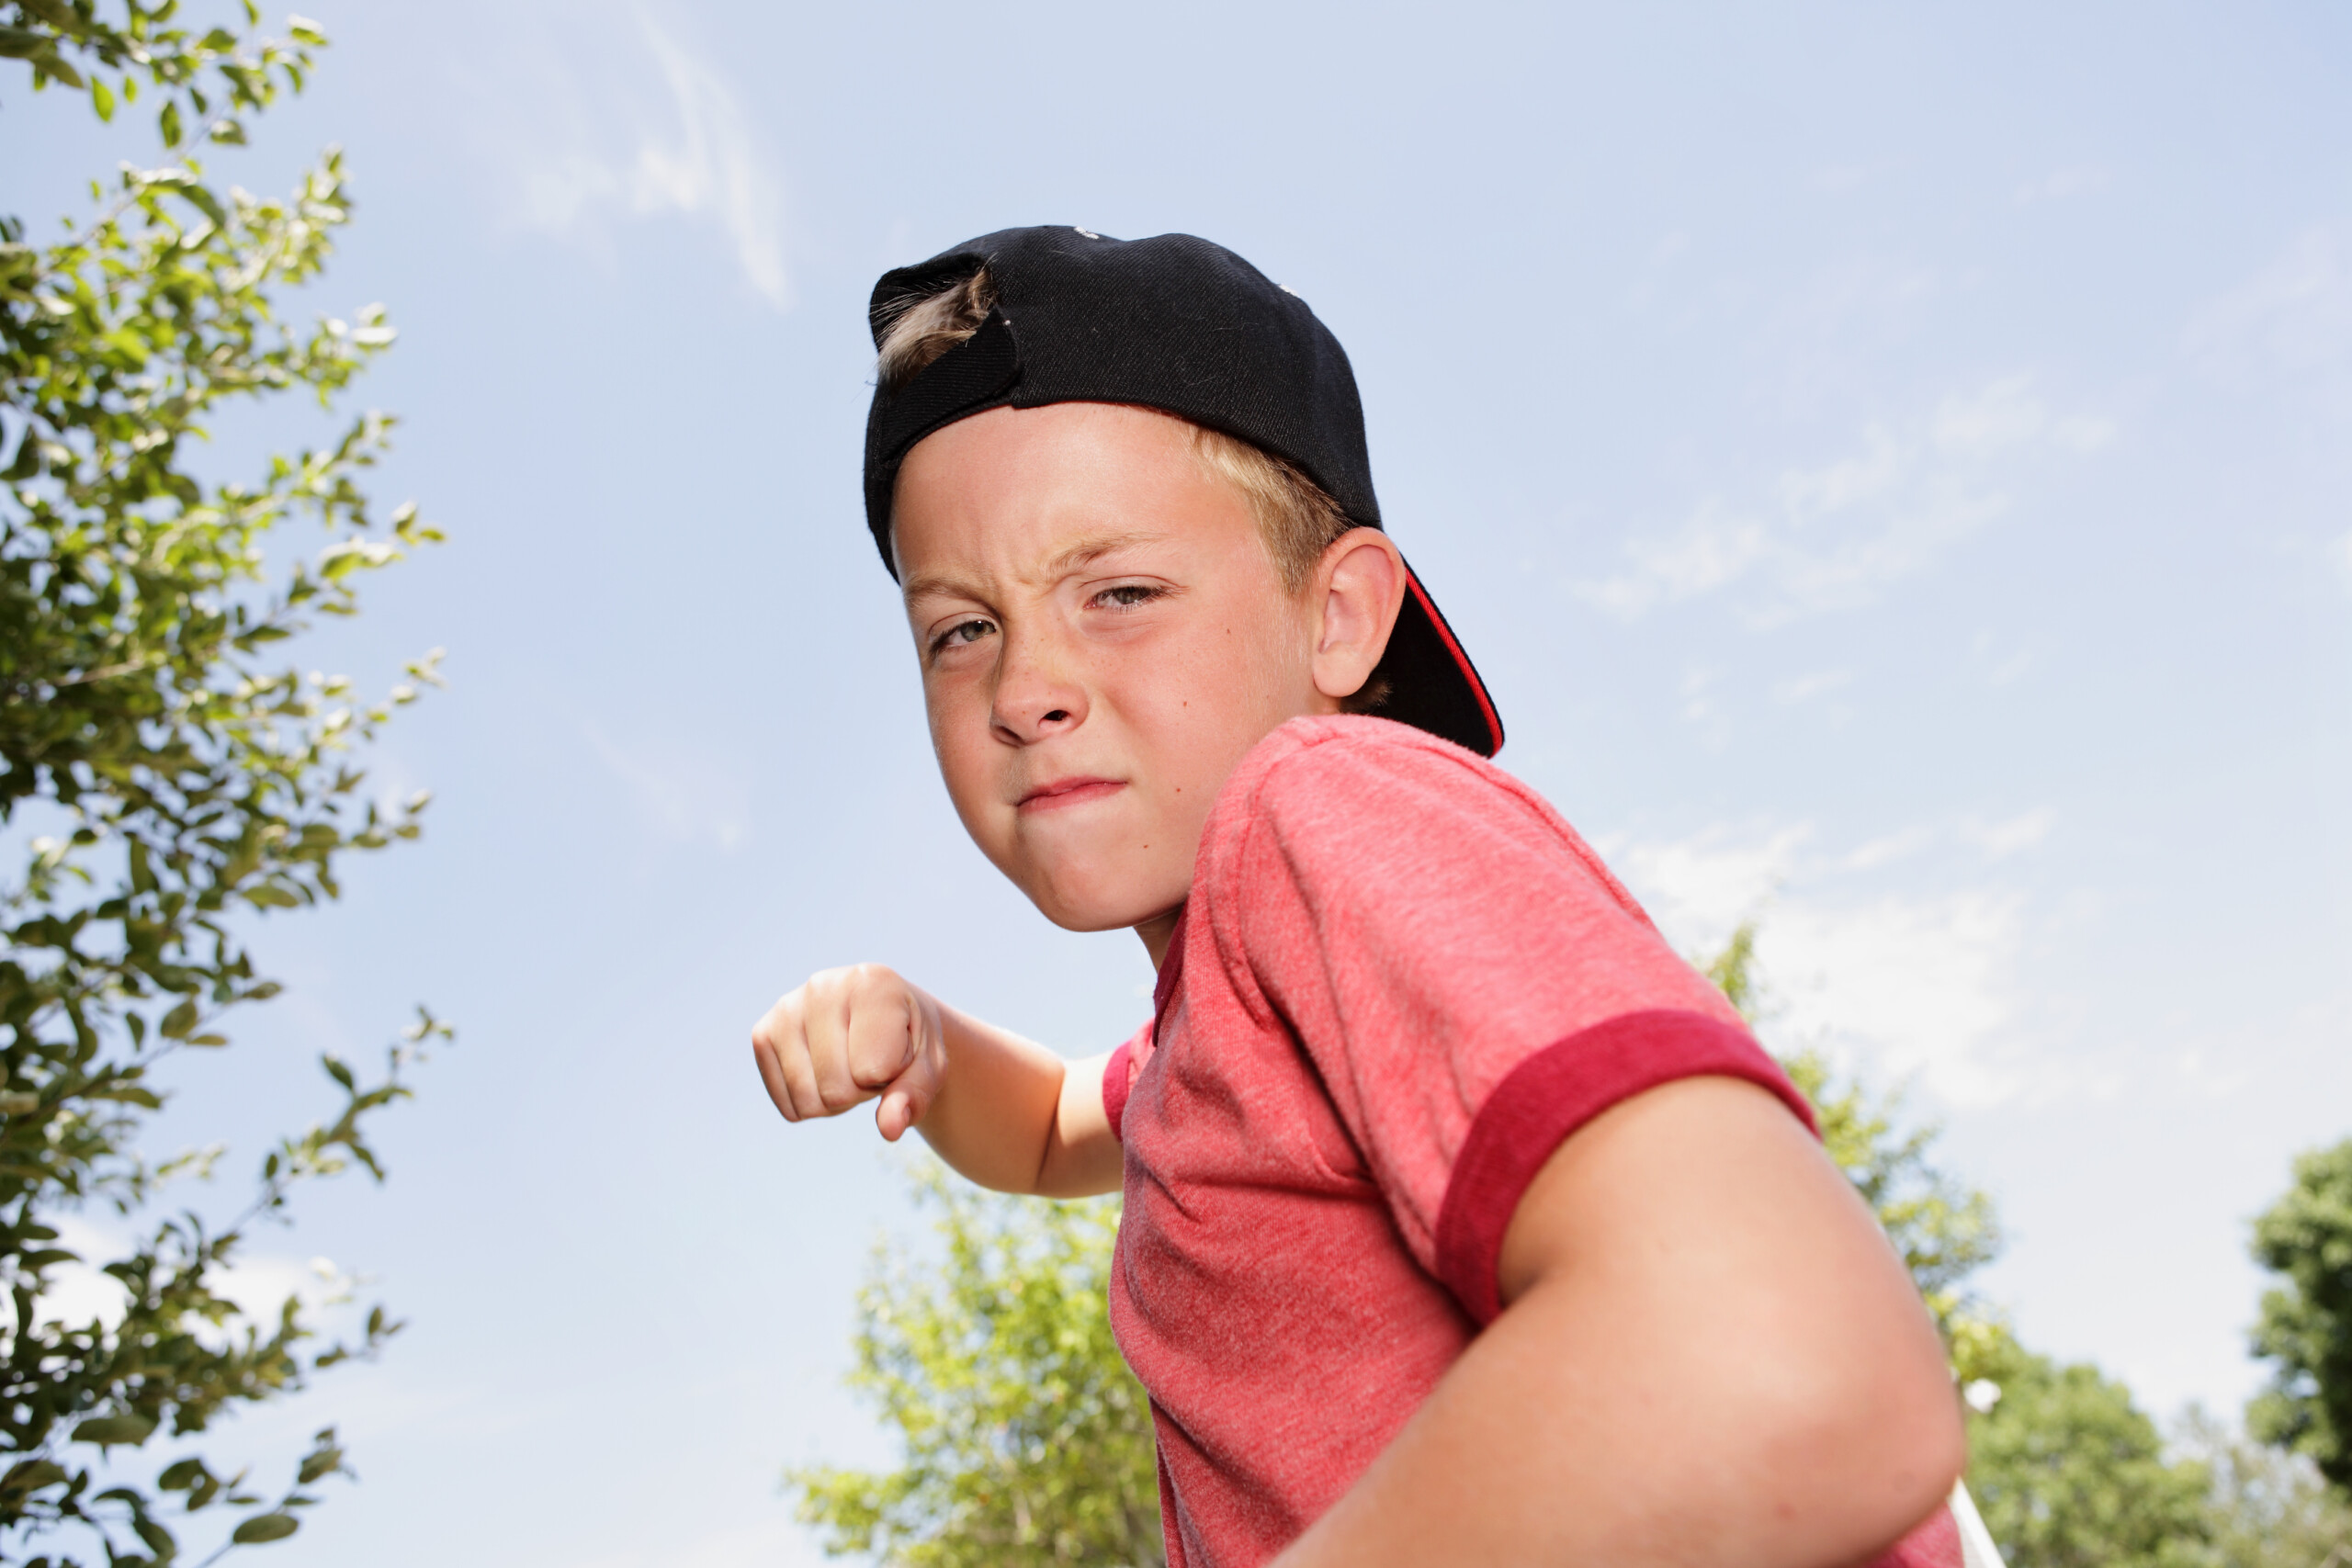 Five Traits that the Parents of Bullies Have in Common